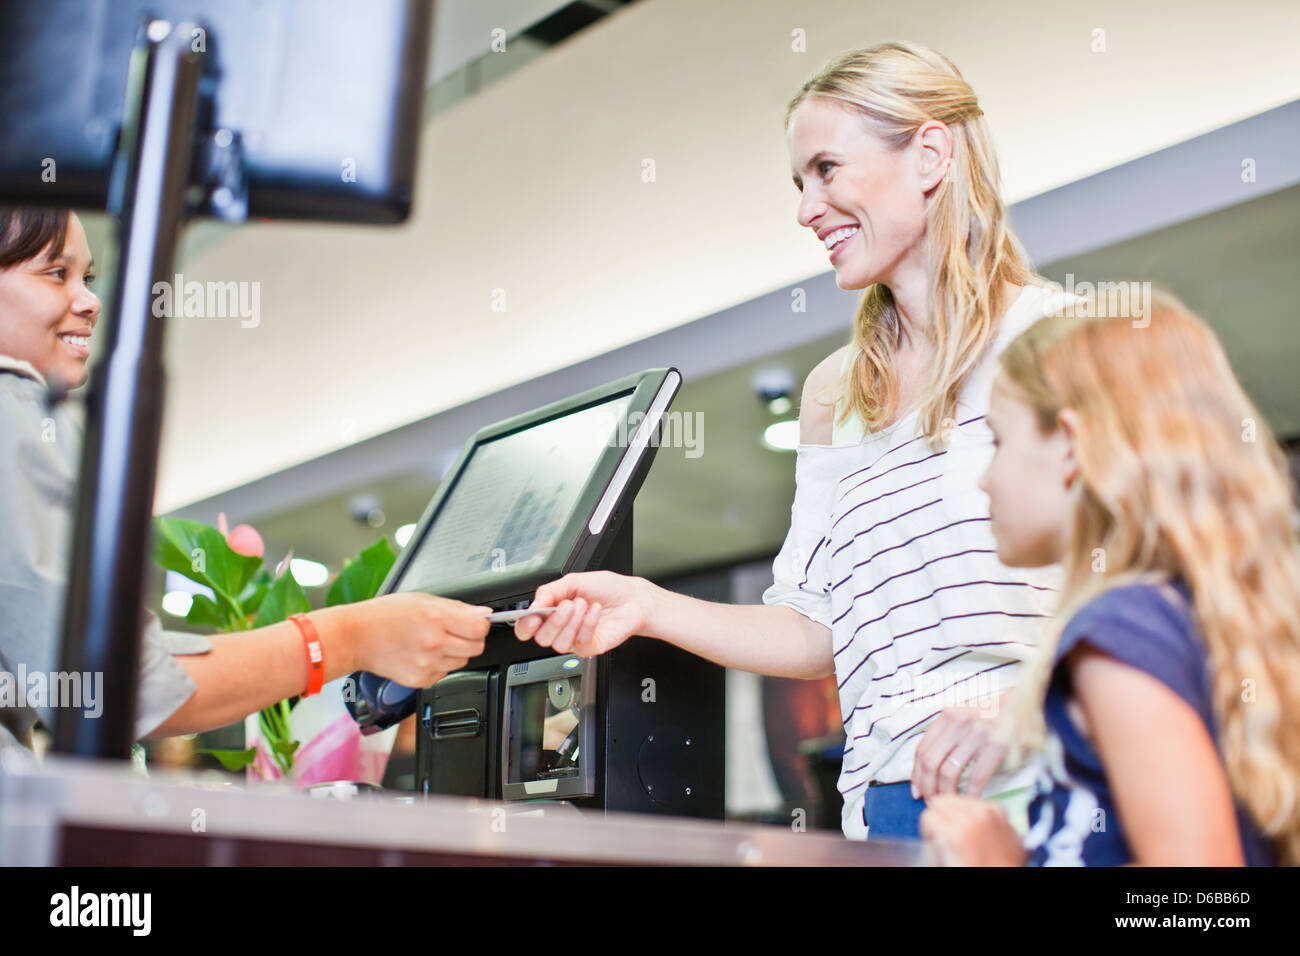 Mother and daughter in grocery store Stock Photo